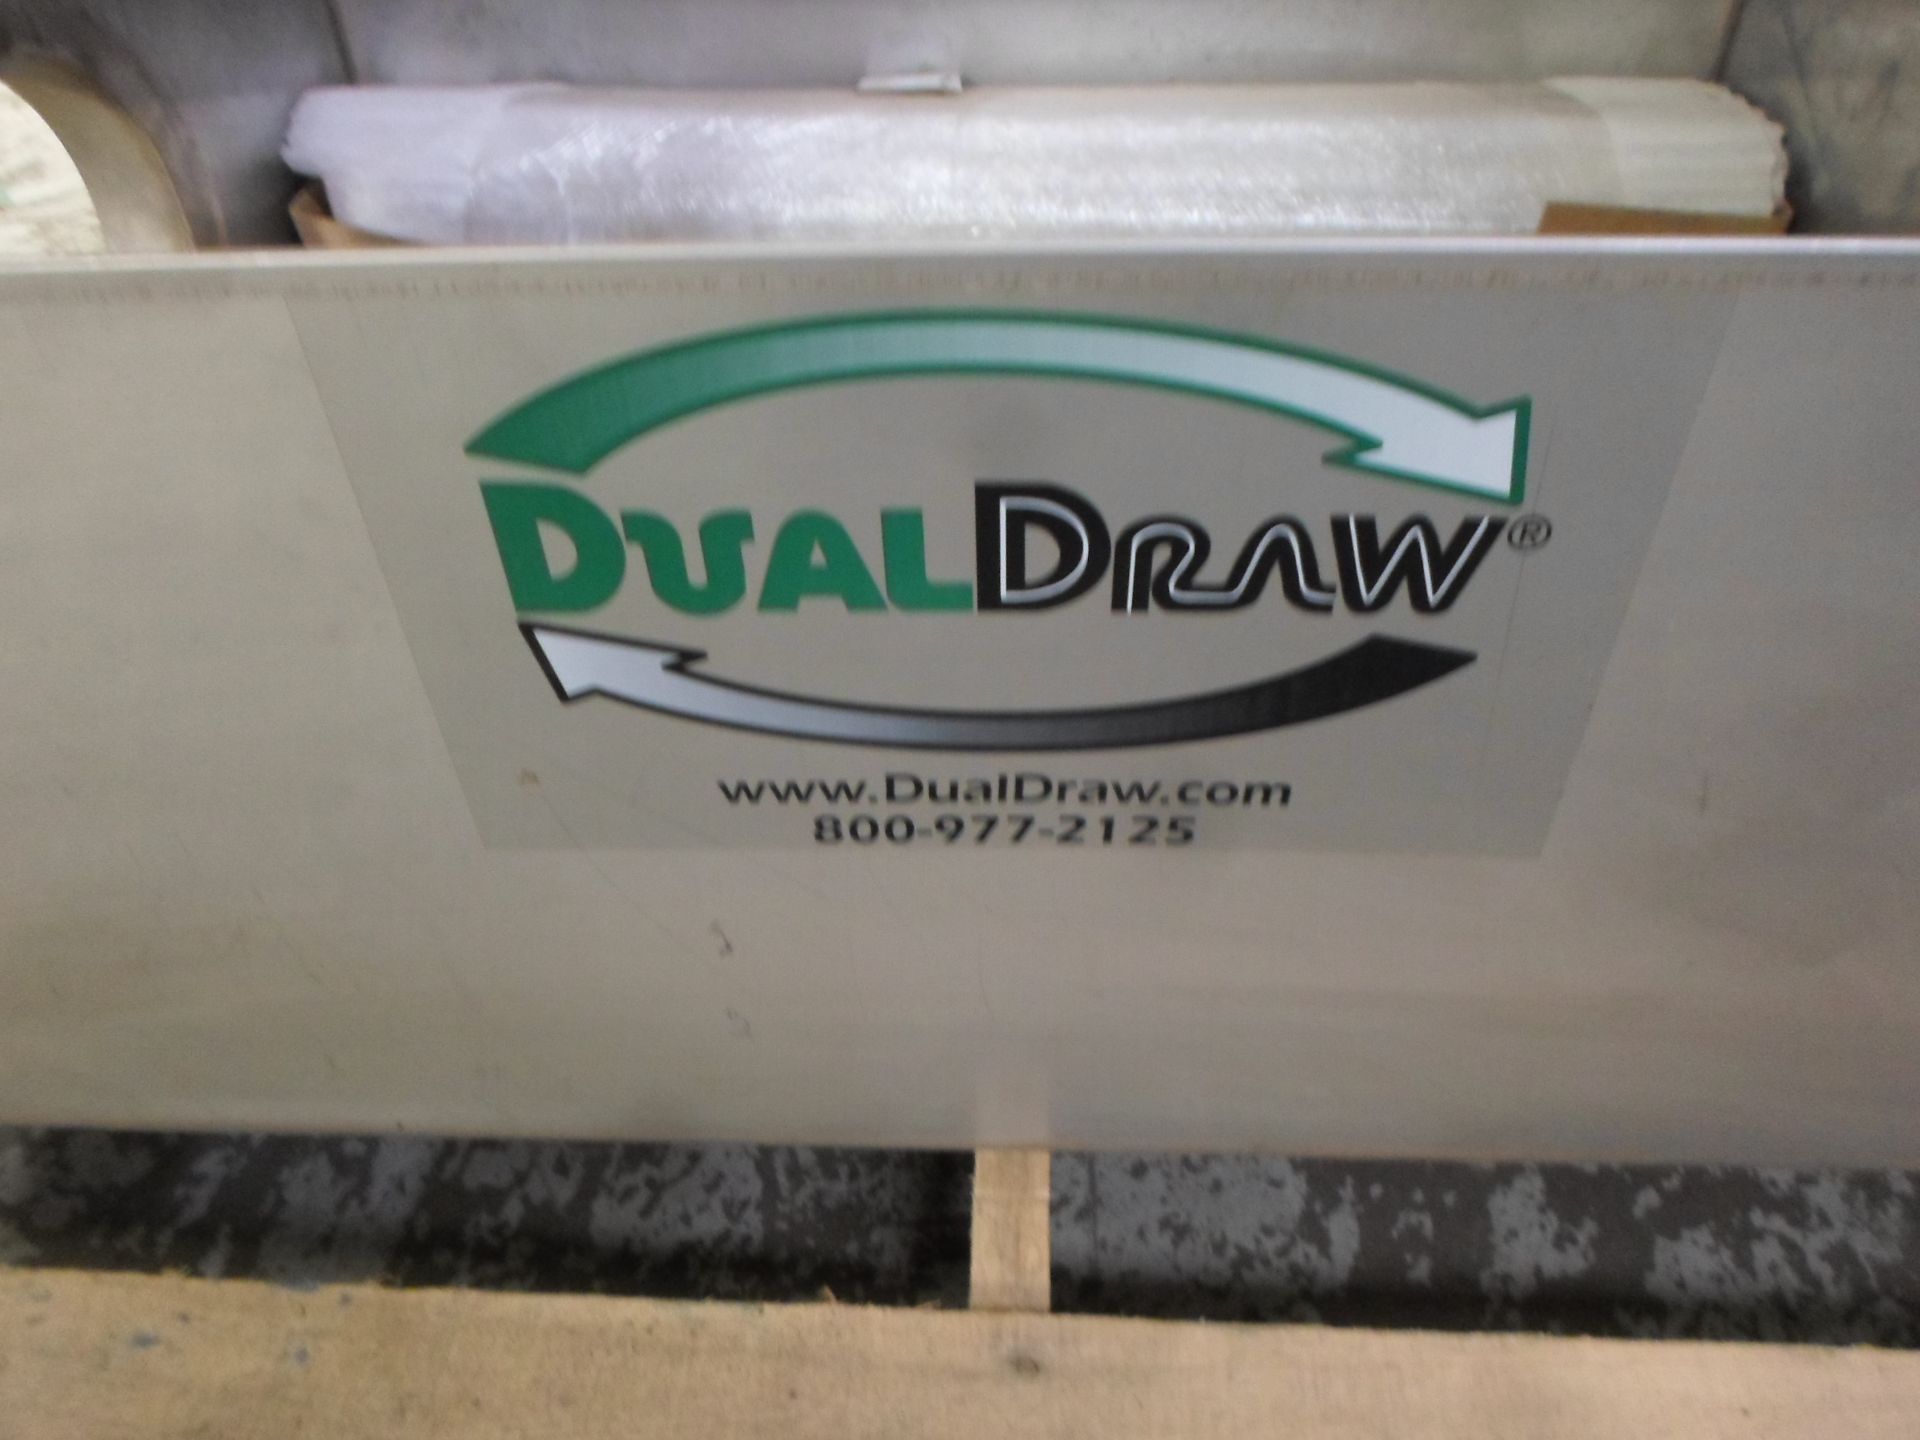 NEW STAINLESS STEAL HOOD DUALDRAW AIR FILTRATION TT500 - Image 2 of 2